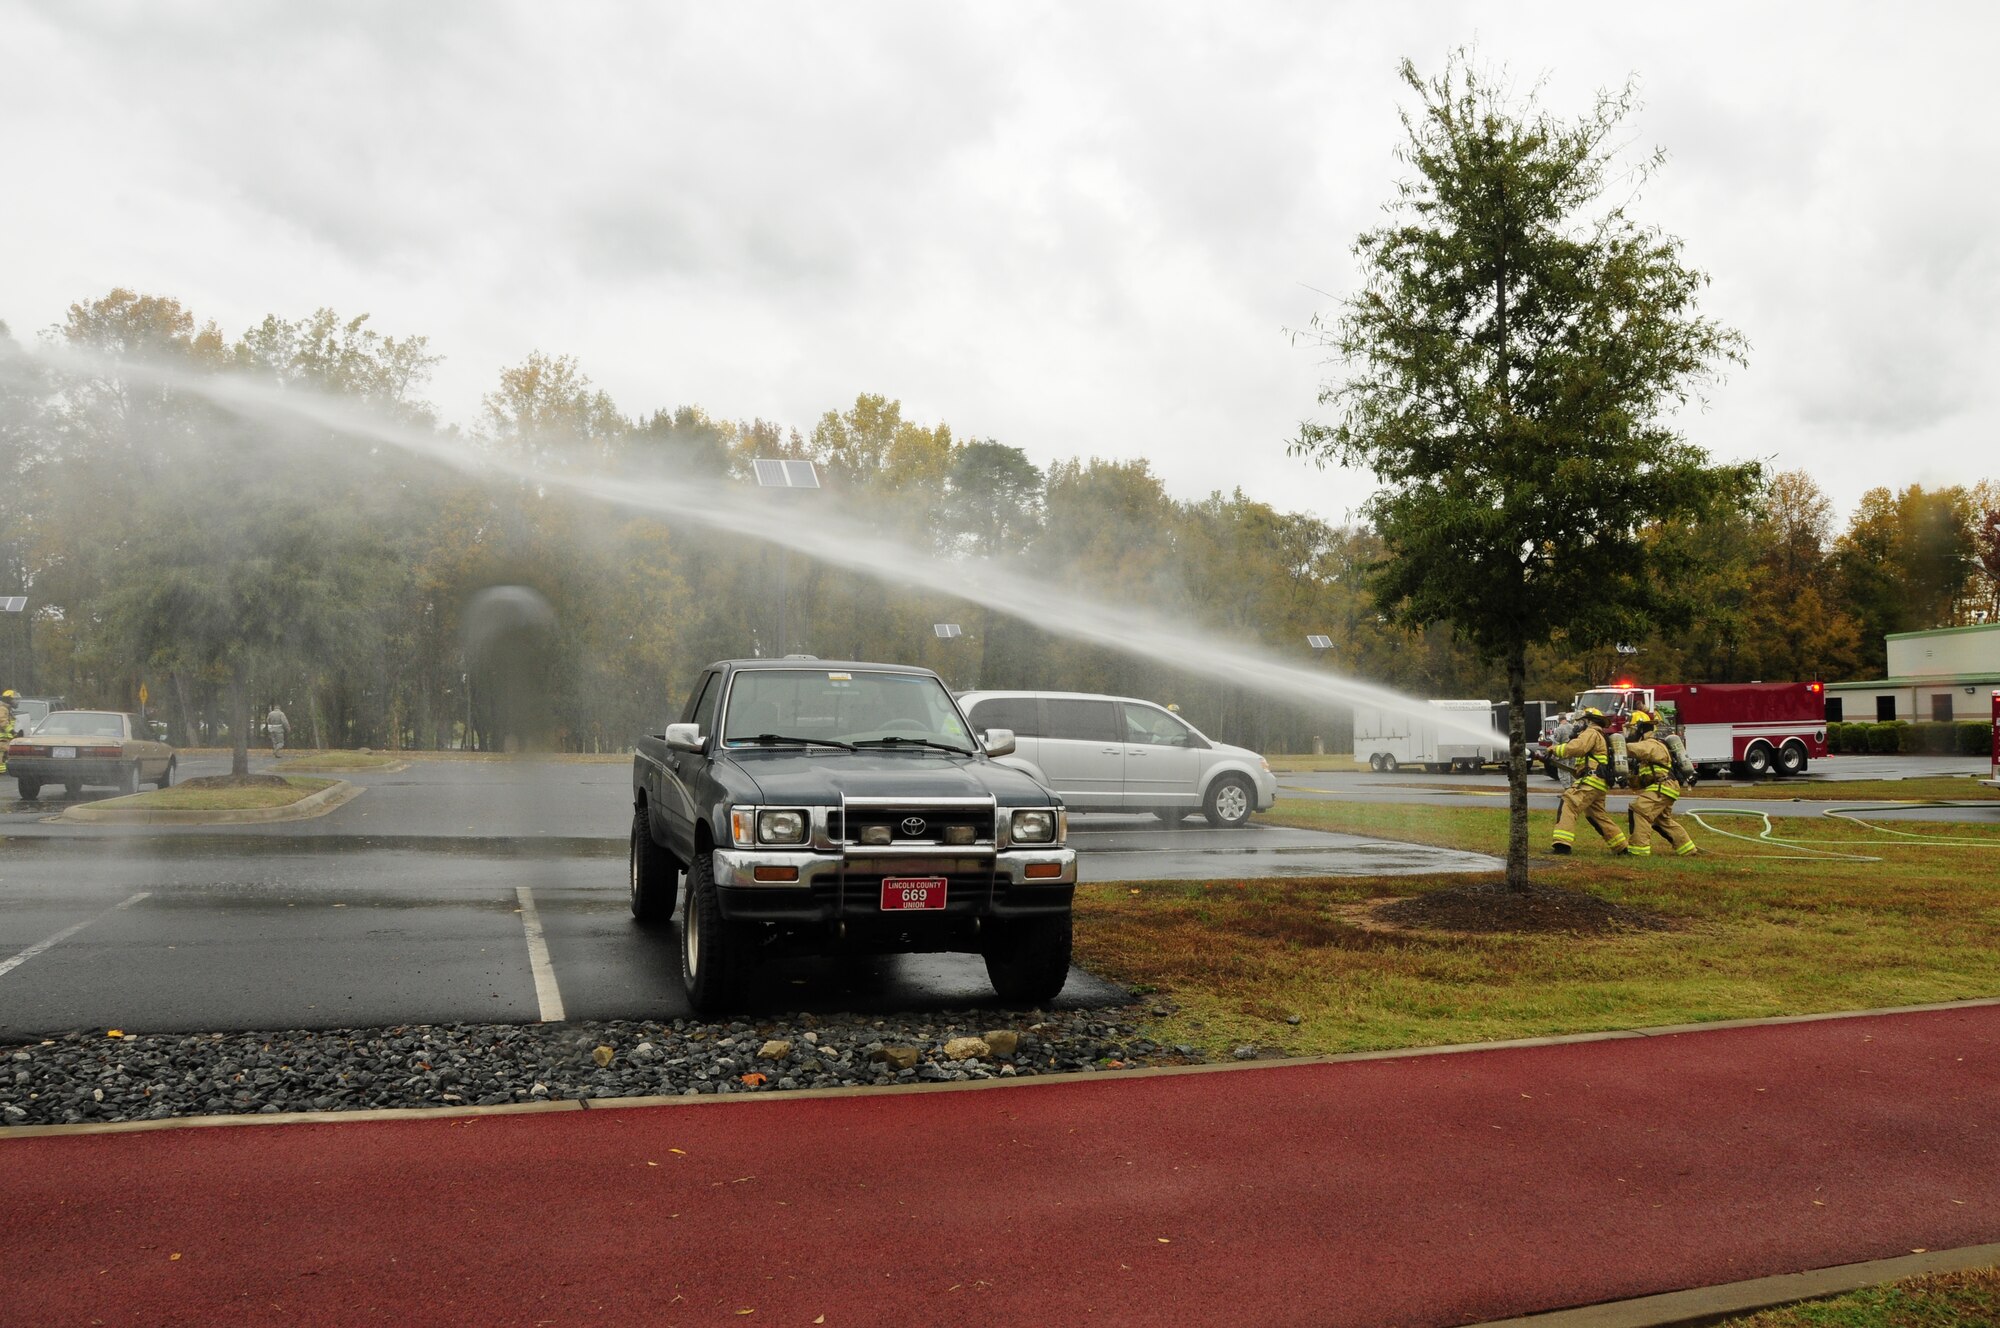 U.S. Air Force Staff SSgt’s Brian Campbell and Joseph Upchurch, firefighters for the 145th Civil Engineer Squadron, use a high pressure fire hose to simulate putting out a fire during the 145th Airlift Wing’s annual Anti-Terrorism Exercise simulating a car bomb detonation inside the perimeter of the North Carolina Air National Guard Base, Charlotte Douglas Intl. Airport, Nov. 1, 2014. The exercise initiated force protection measures across the base and tested the Wing’s ability to respond accordingly. (U.S. Air National Guard photo by Senior Airman Laura J. Montgomery, 145th Public Affairs/Released)